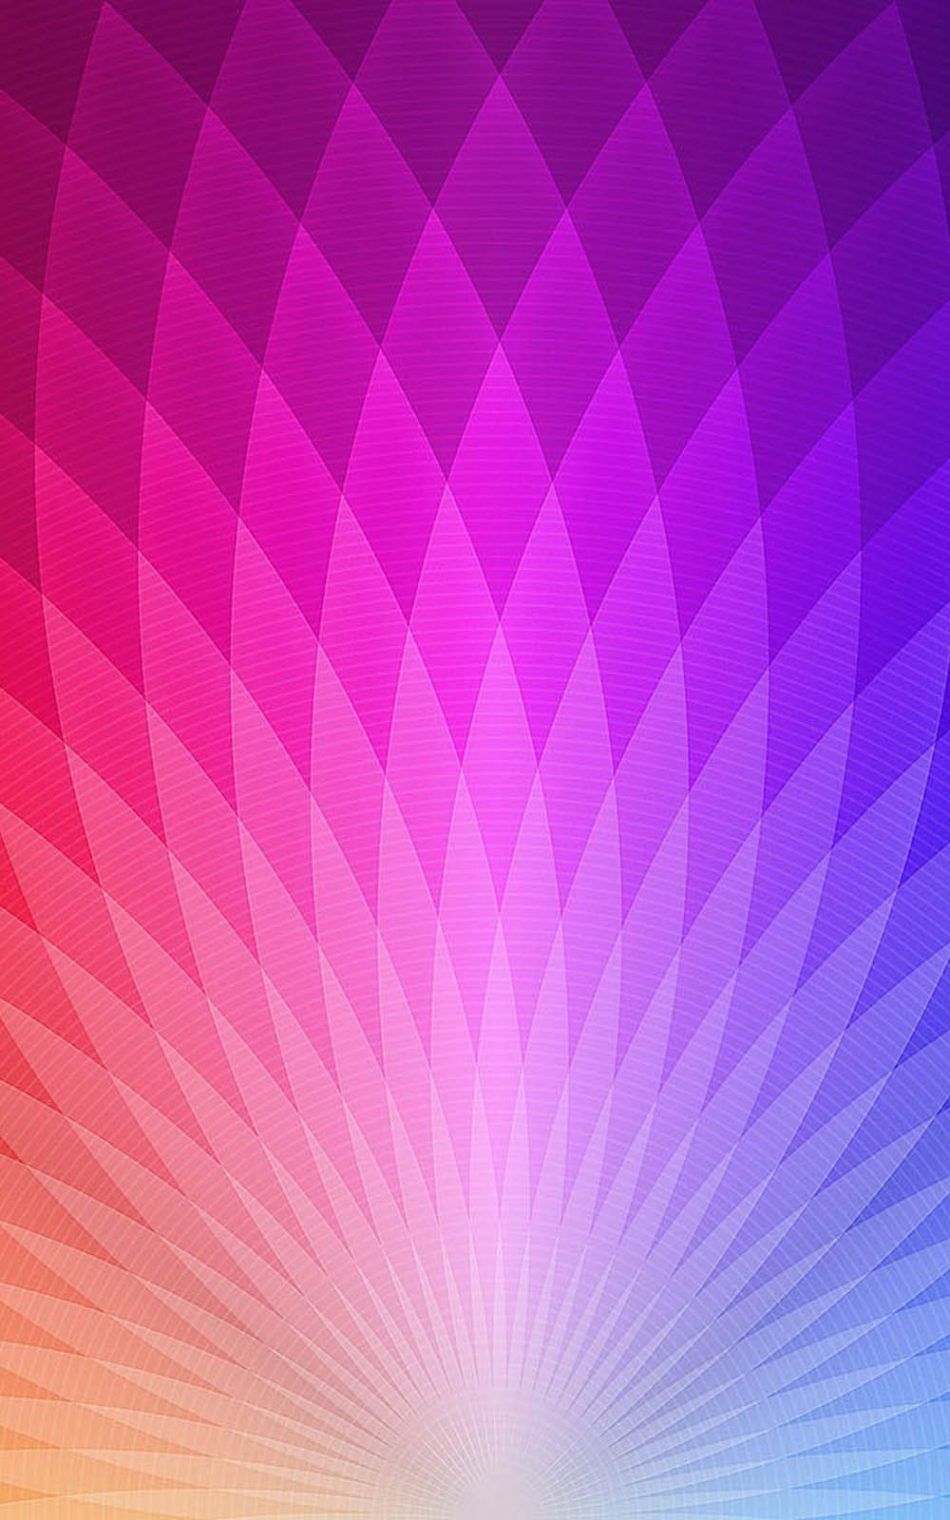 Amazing Colorful Abstract Free 4K Ultra HD Mobile Wallpaper